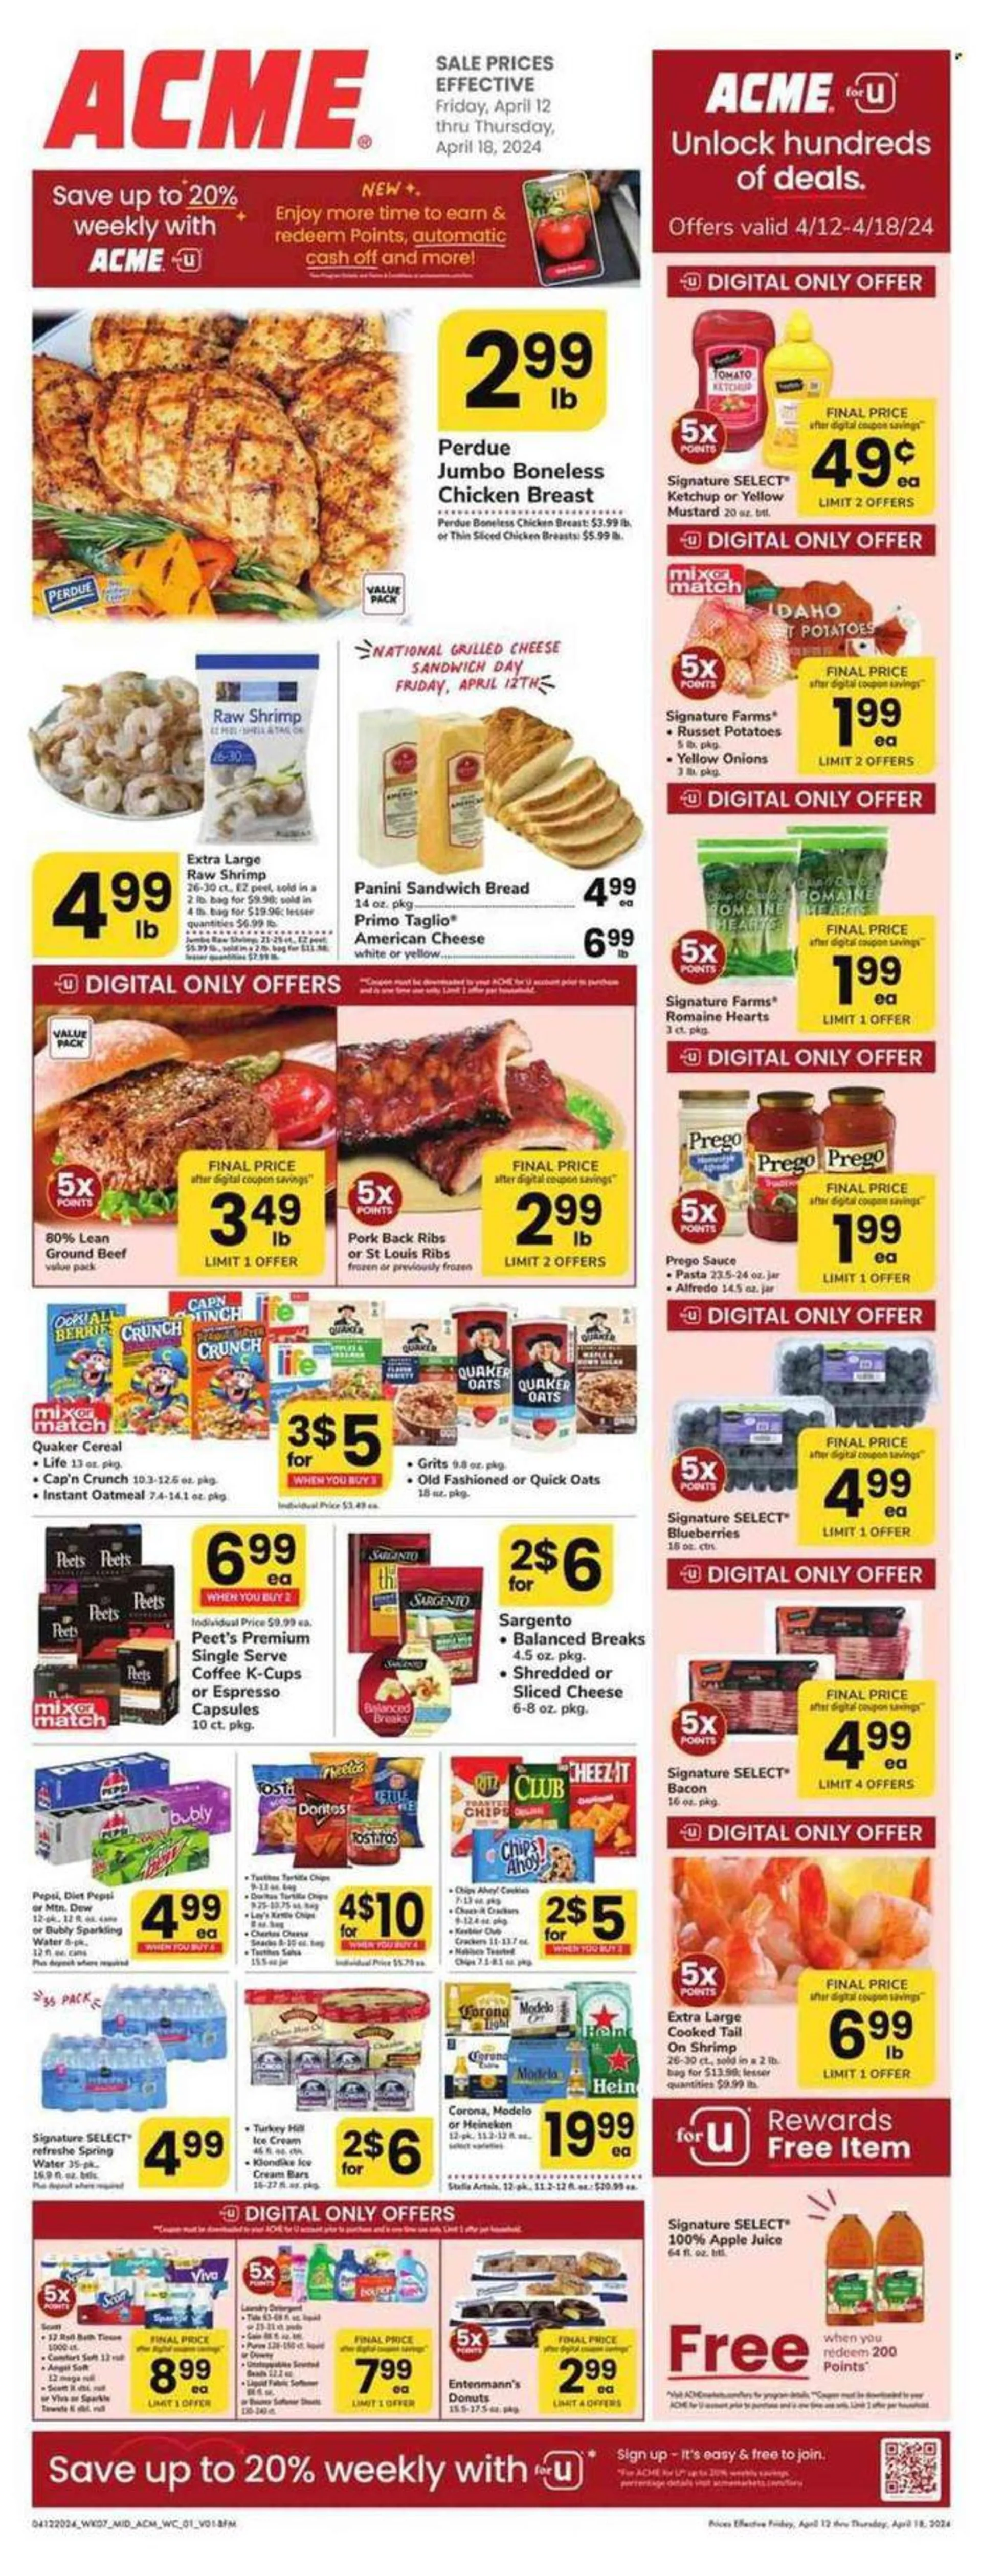 Weekly ad ACME Weekly ad 12/04 from April 12 to April 18 2024 - Page 1